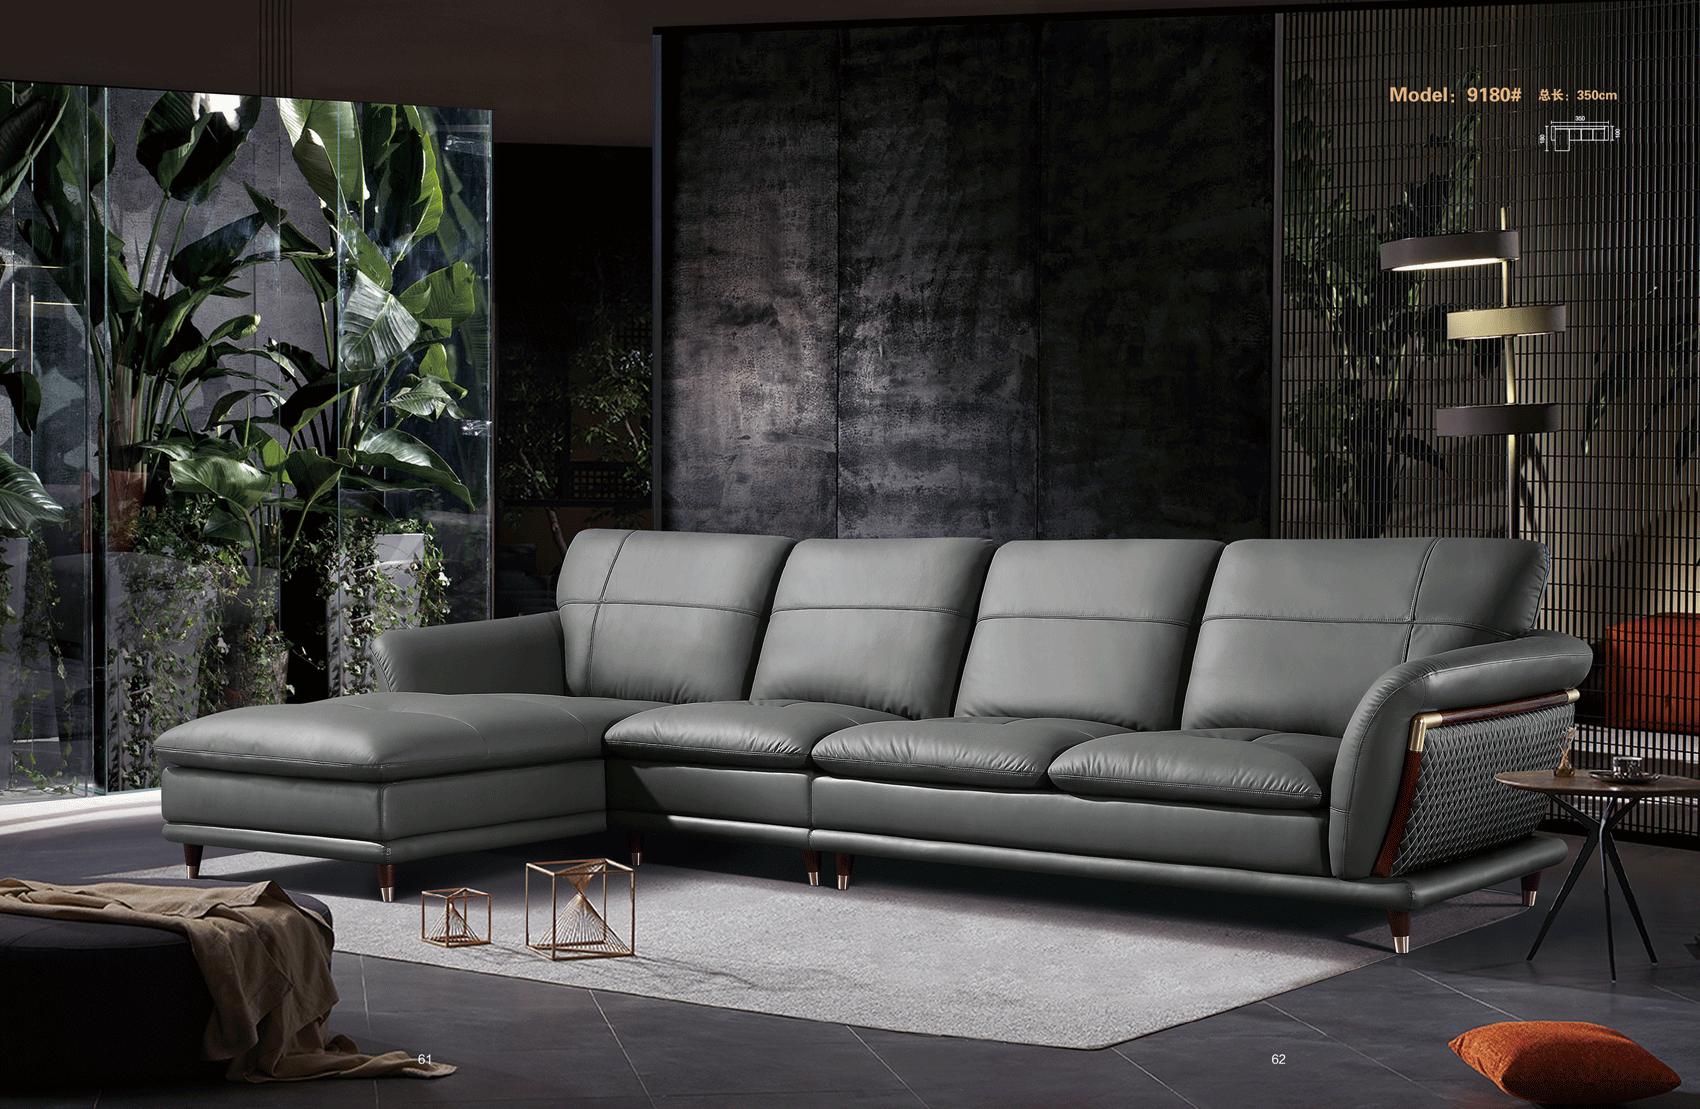 Contemporary, Modern Sectional Sofa Set 9180 Sectional 9180SECTIONAL-2PC in Gray Genuine Leather